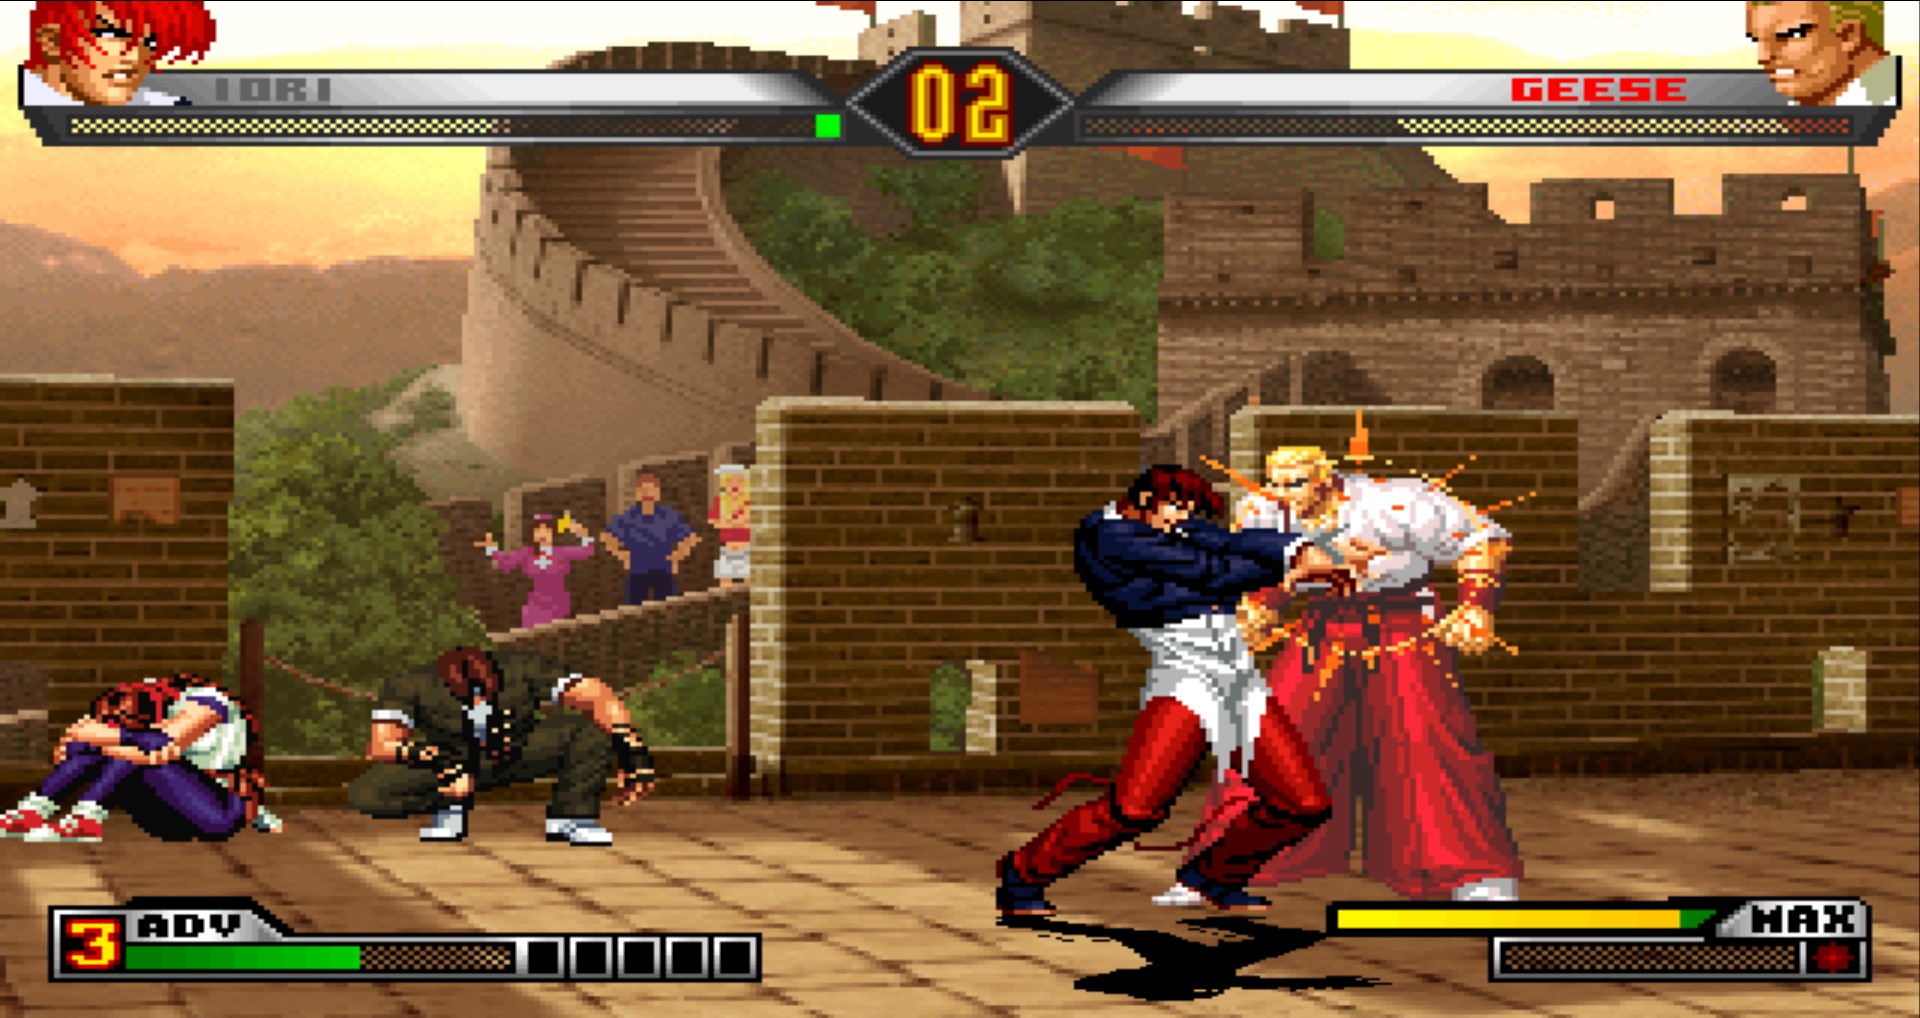 jogar the king of fighters 98 online